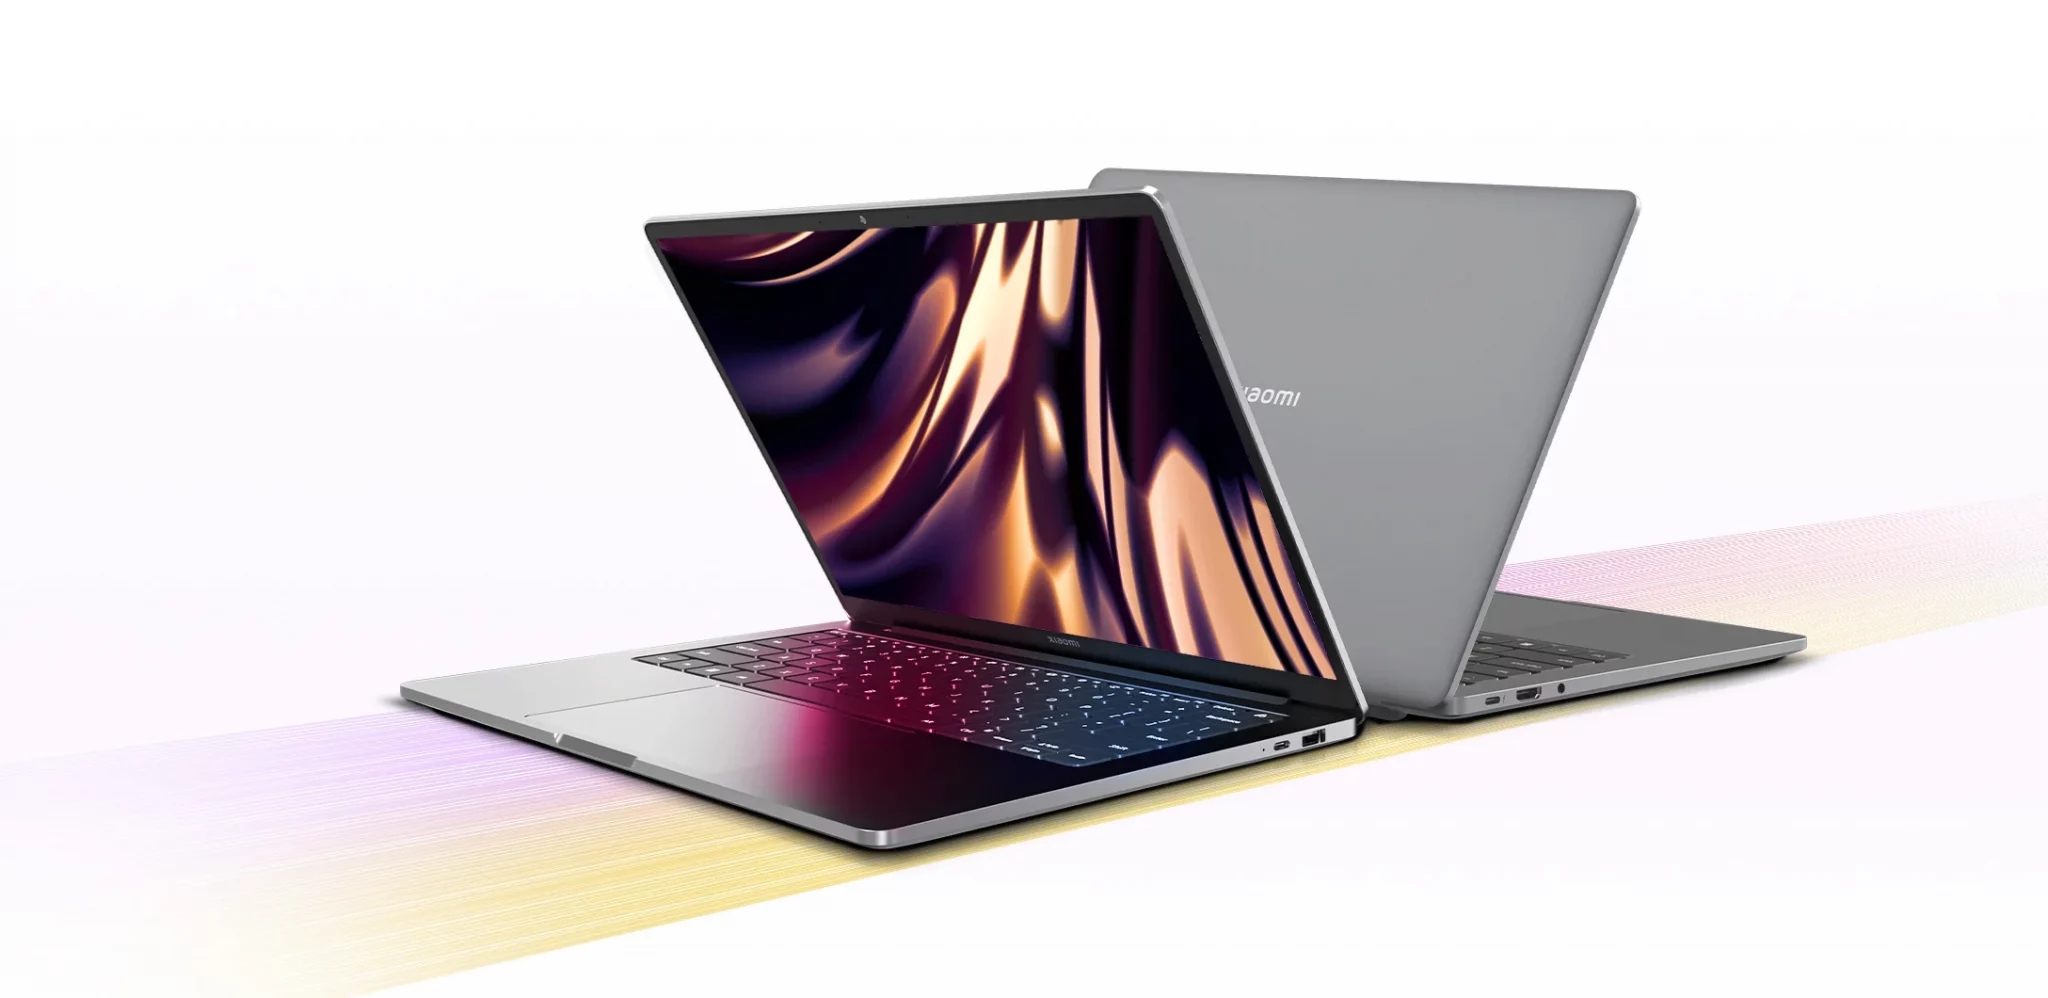 Xiaomi Notebook Pro 120G: Laptop with a 14-inch screen at 120 Hz, an Intel Core i5-12450H processor and Windows 11